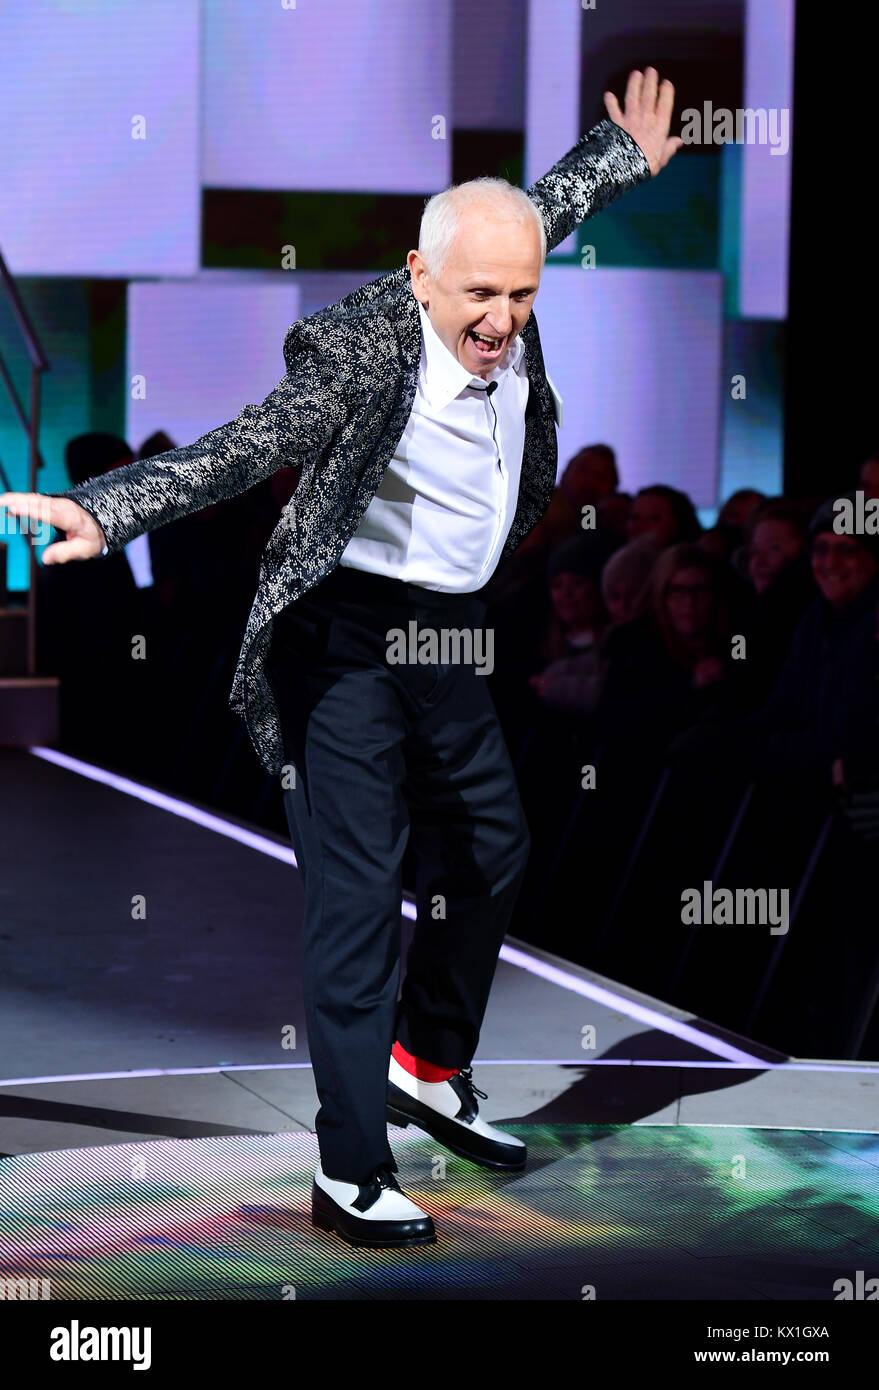 London, UK. 05th Jan, 2018. Wayne Sleep enters the house during the Celebrity Big Brother Men's Launch held at Elstree Studios in Borehamwood, Hertfordshire. PRESS ASSOCIATION Photo. Picture date: Friday January 5, 2018. See PA story SHOWBIZ CBB Housemates. Photo credit should read: Ian West/PA Wire Credit: Gtres Información más Comuniación on line, S.L./Alamy Live News Stock Photo